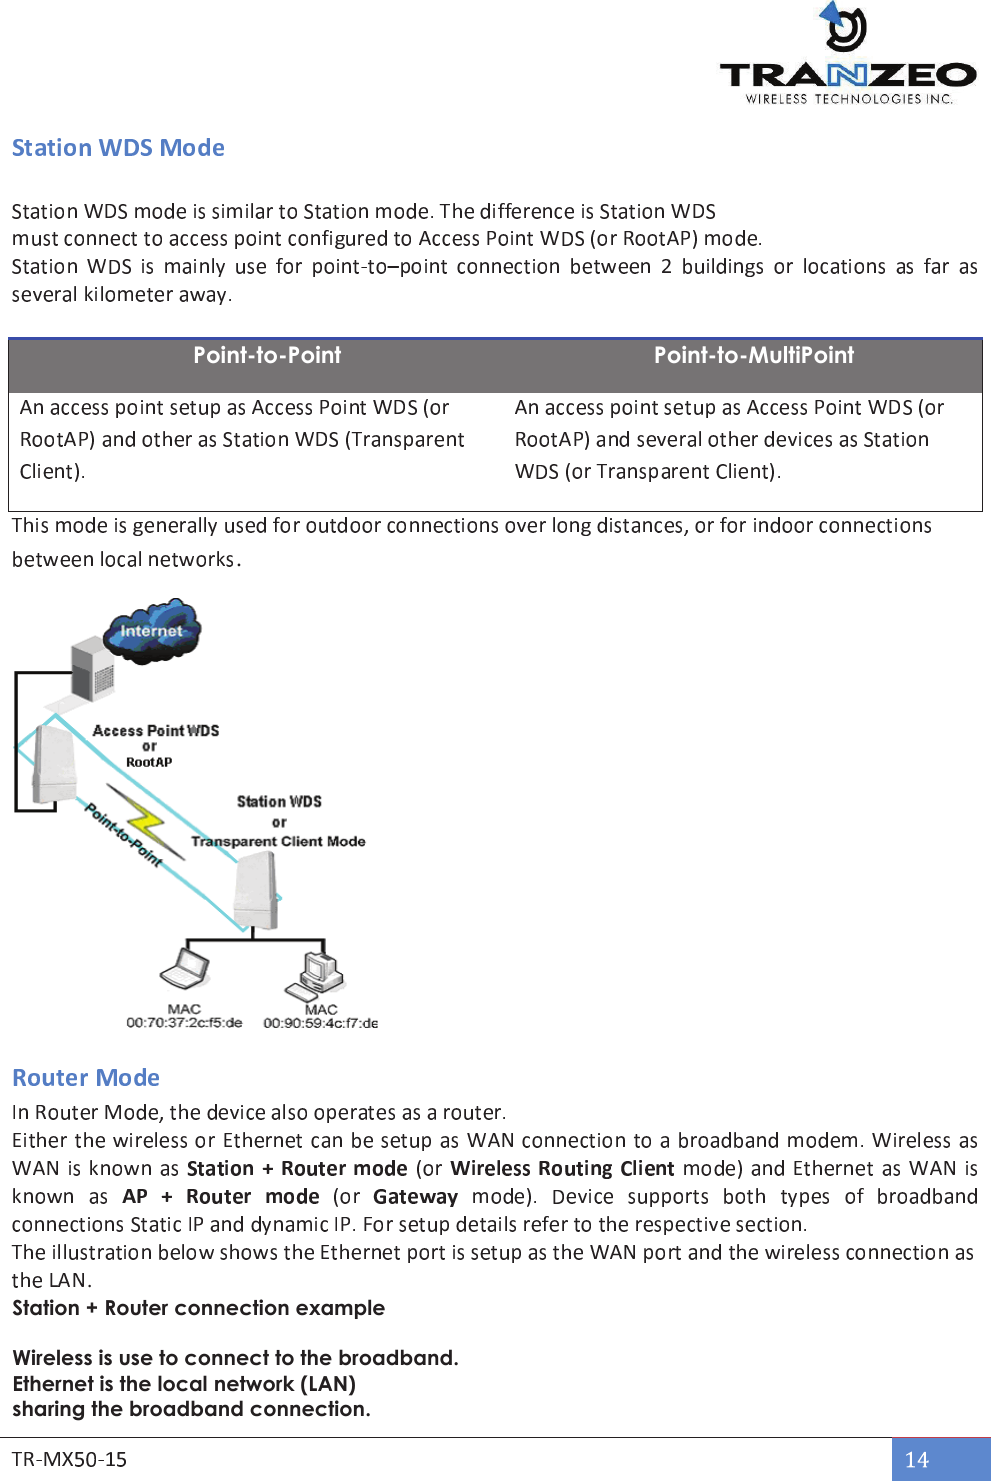 Point-to-Point Point-to-MultiPoint . . Station + Router connection example Wireless is use to connect to the broadband. Ethernet is the local network (LAN) sharing the broadband connection. 